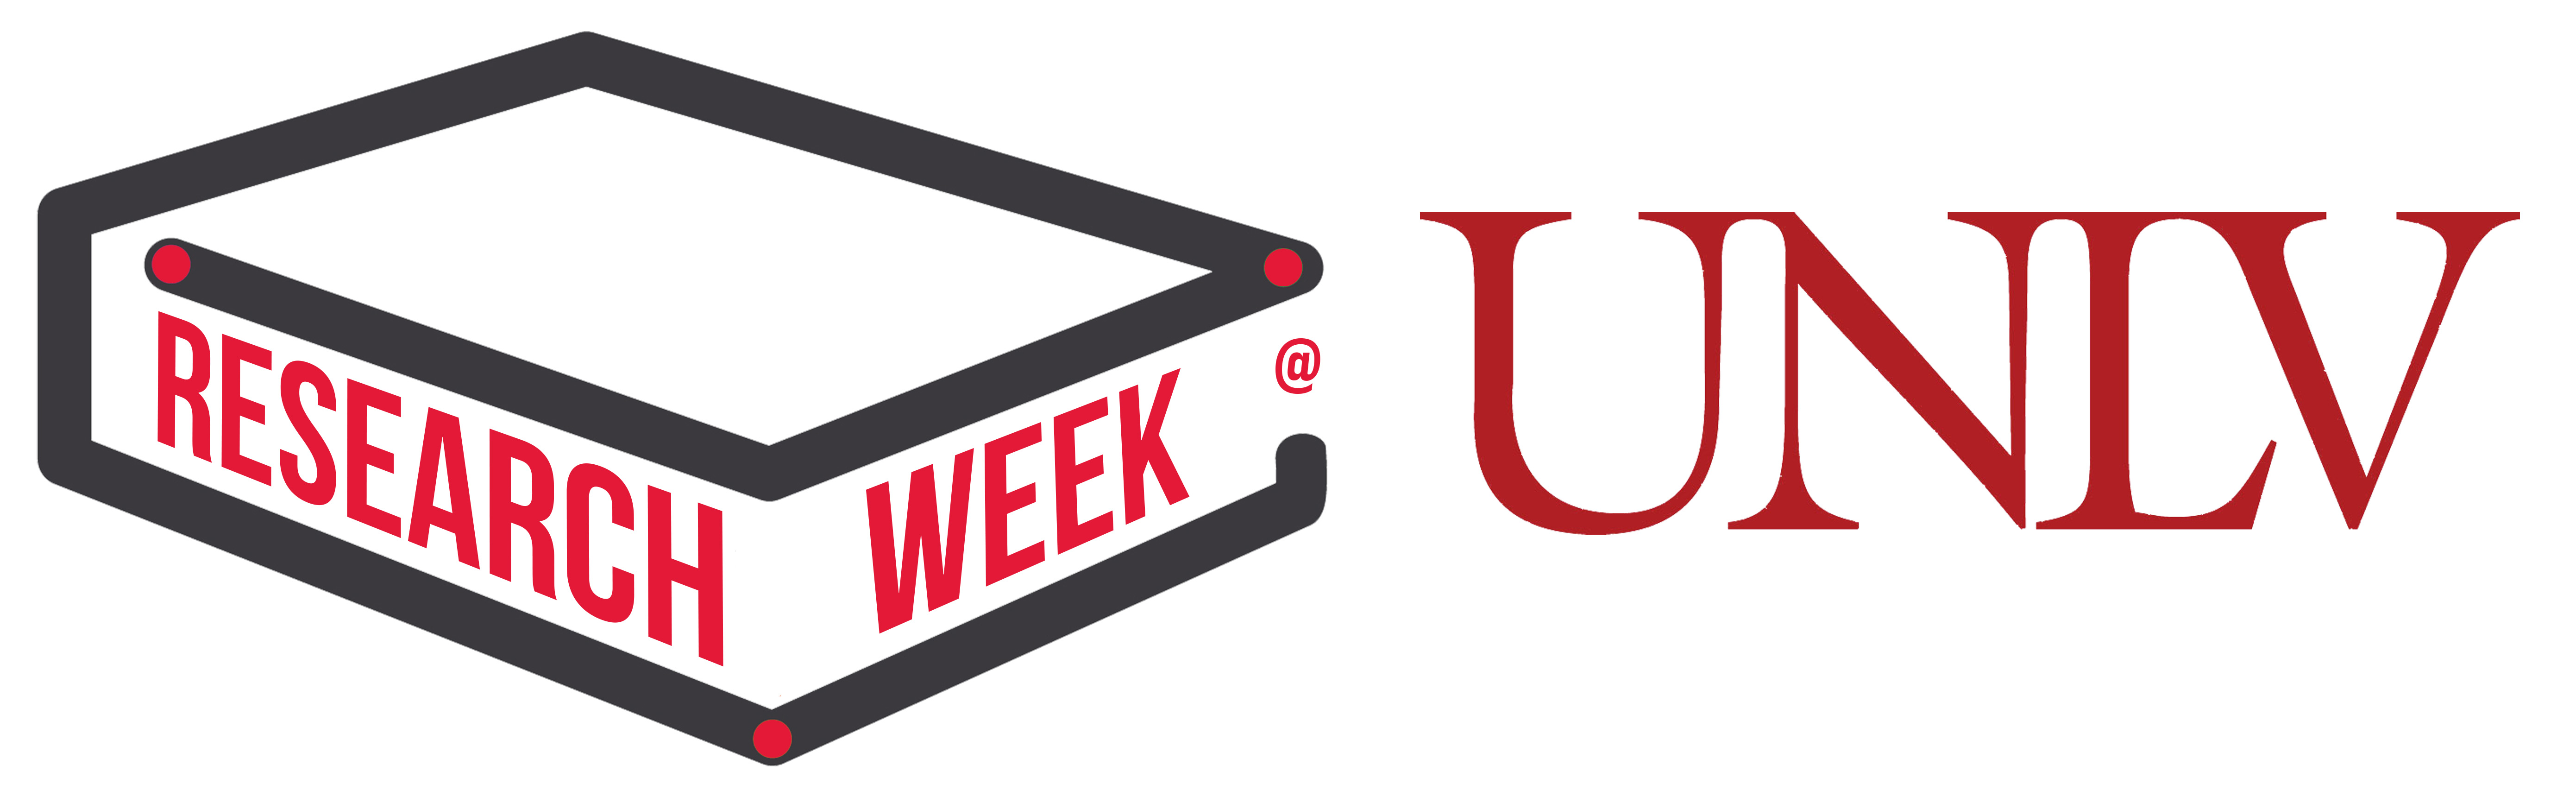 Research Week at UNLV